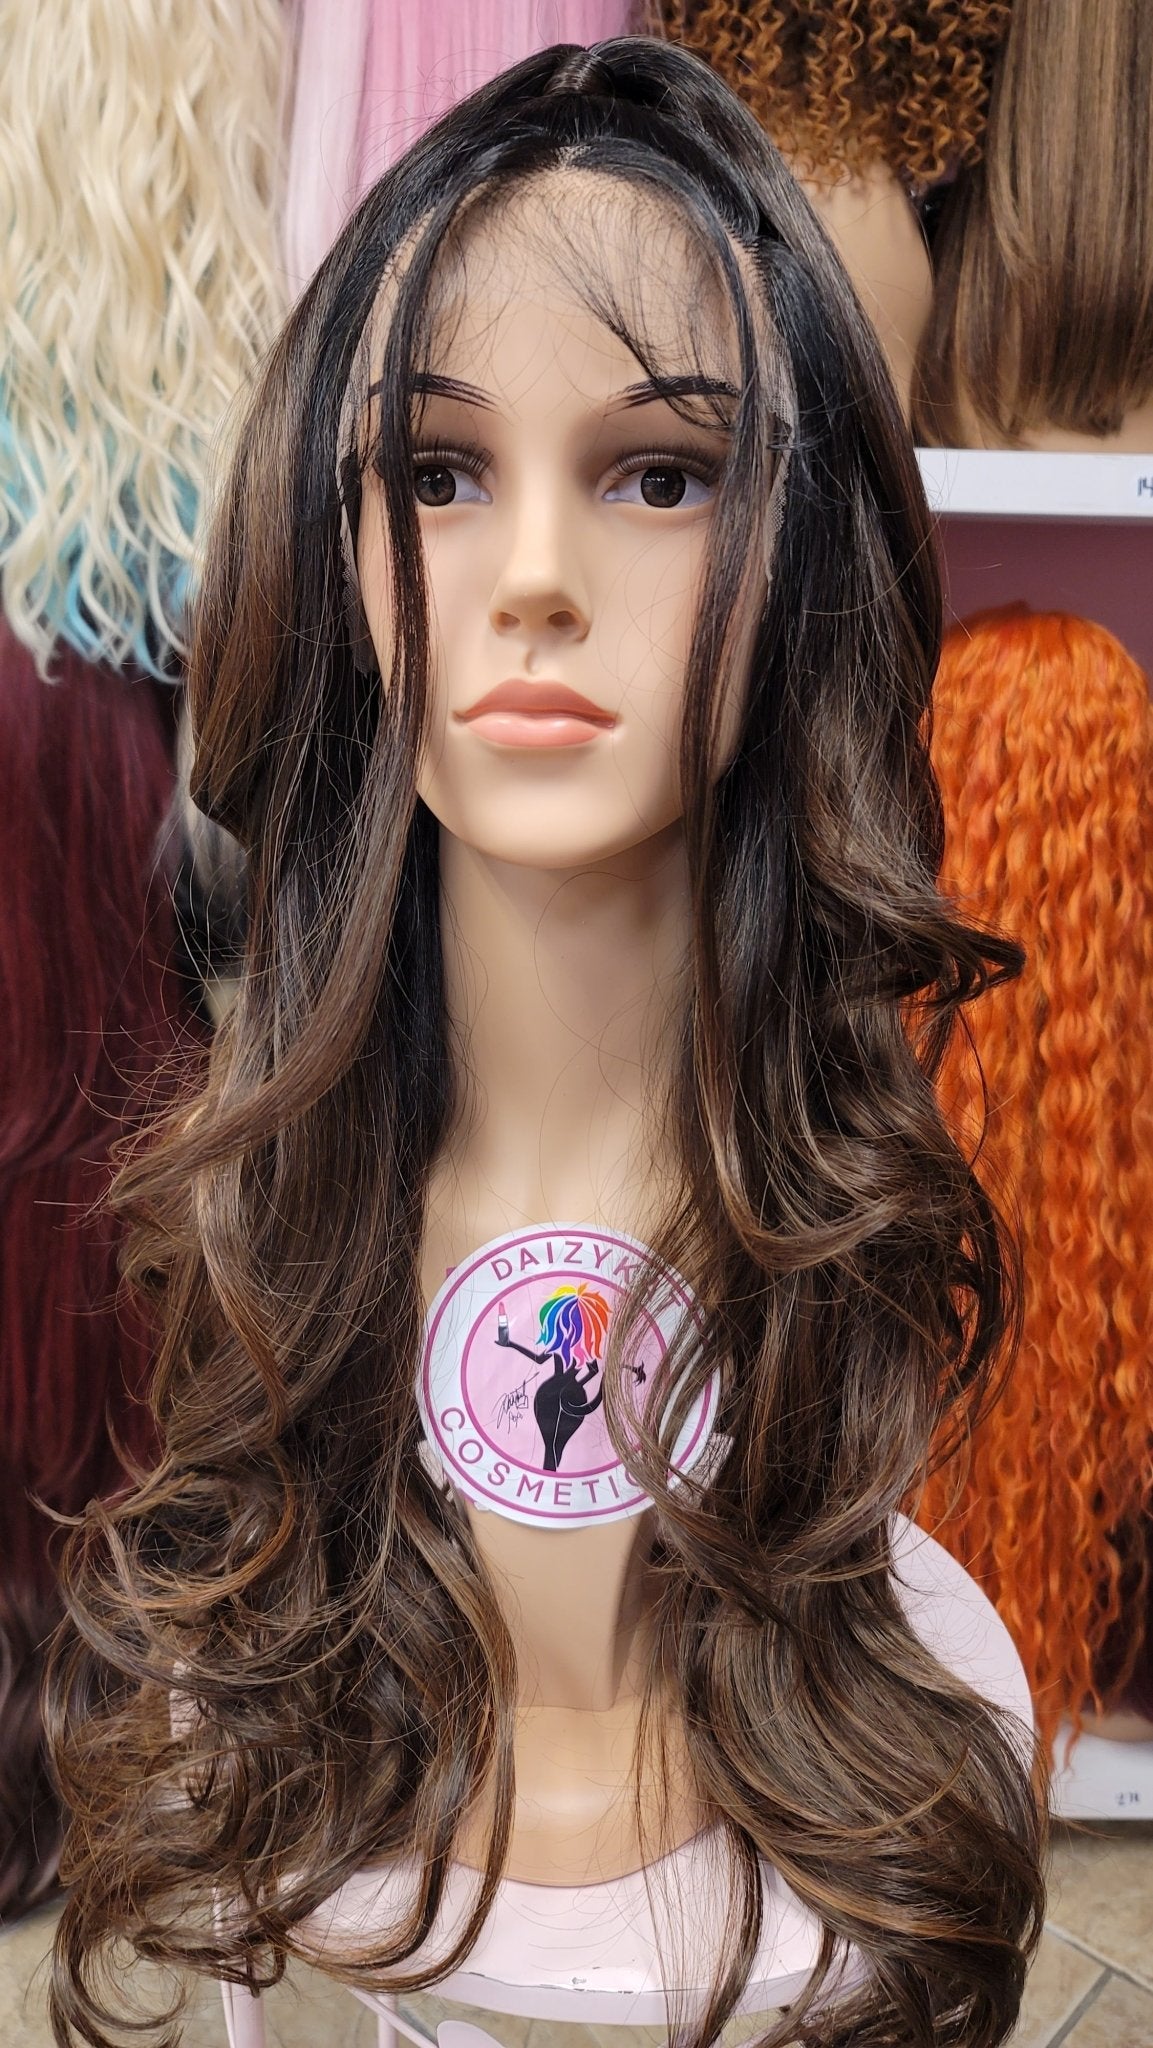 449 - 13x2 & 360 Top Pony Lace Front Wig - 1B/BROWN - DaizyKat Cosmetics 449 - 13x2 & 360 Top Pony Lace Front Wig - 1B/BROWN DaizyKat Cosmetics WIGS